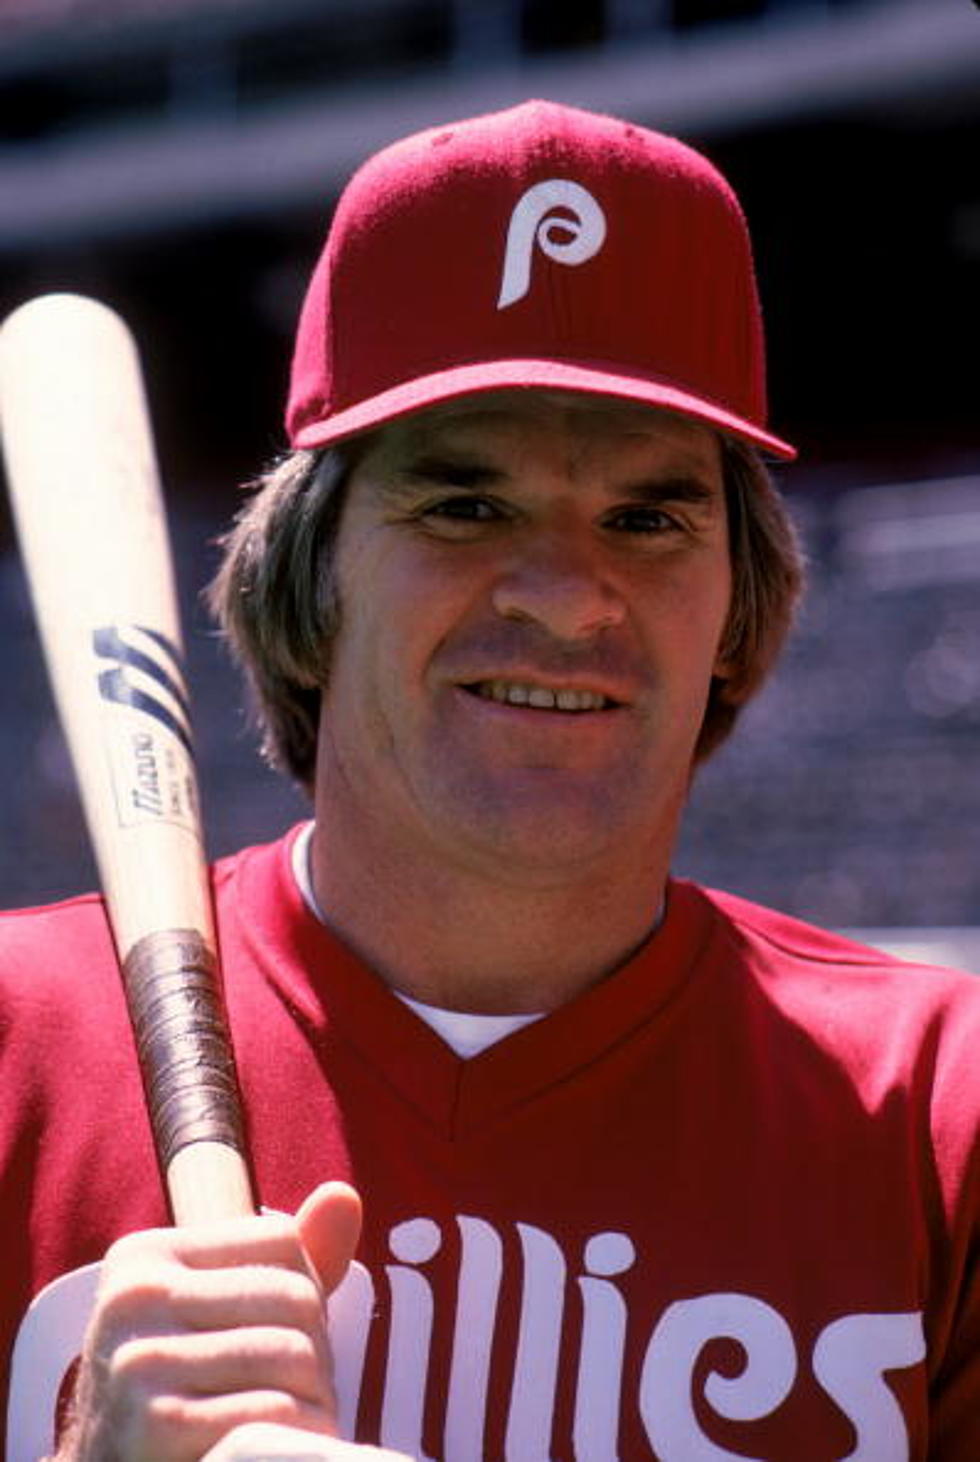 Who is former Philadelphia Phillies player Pete Rose?